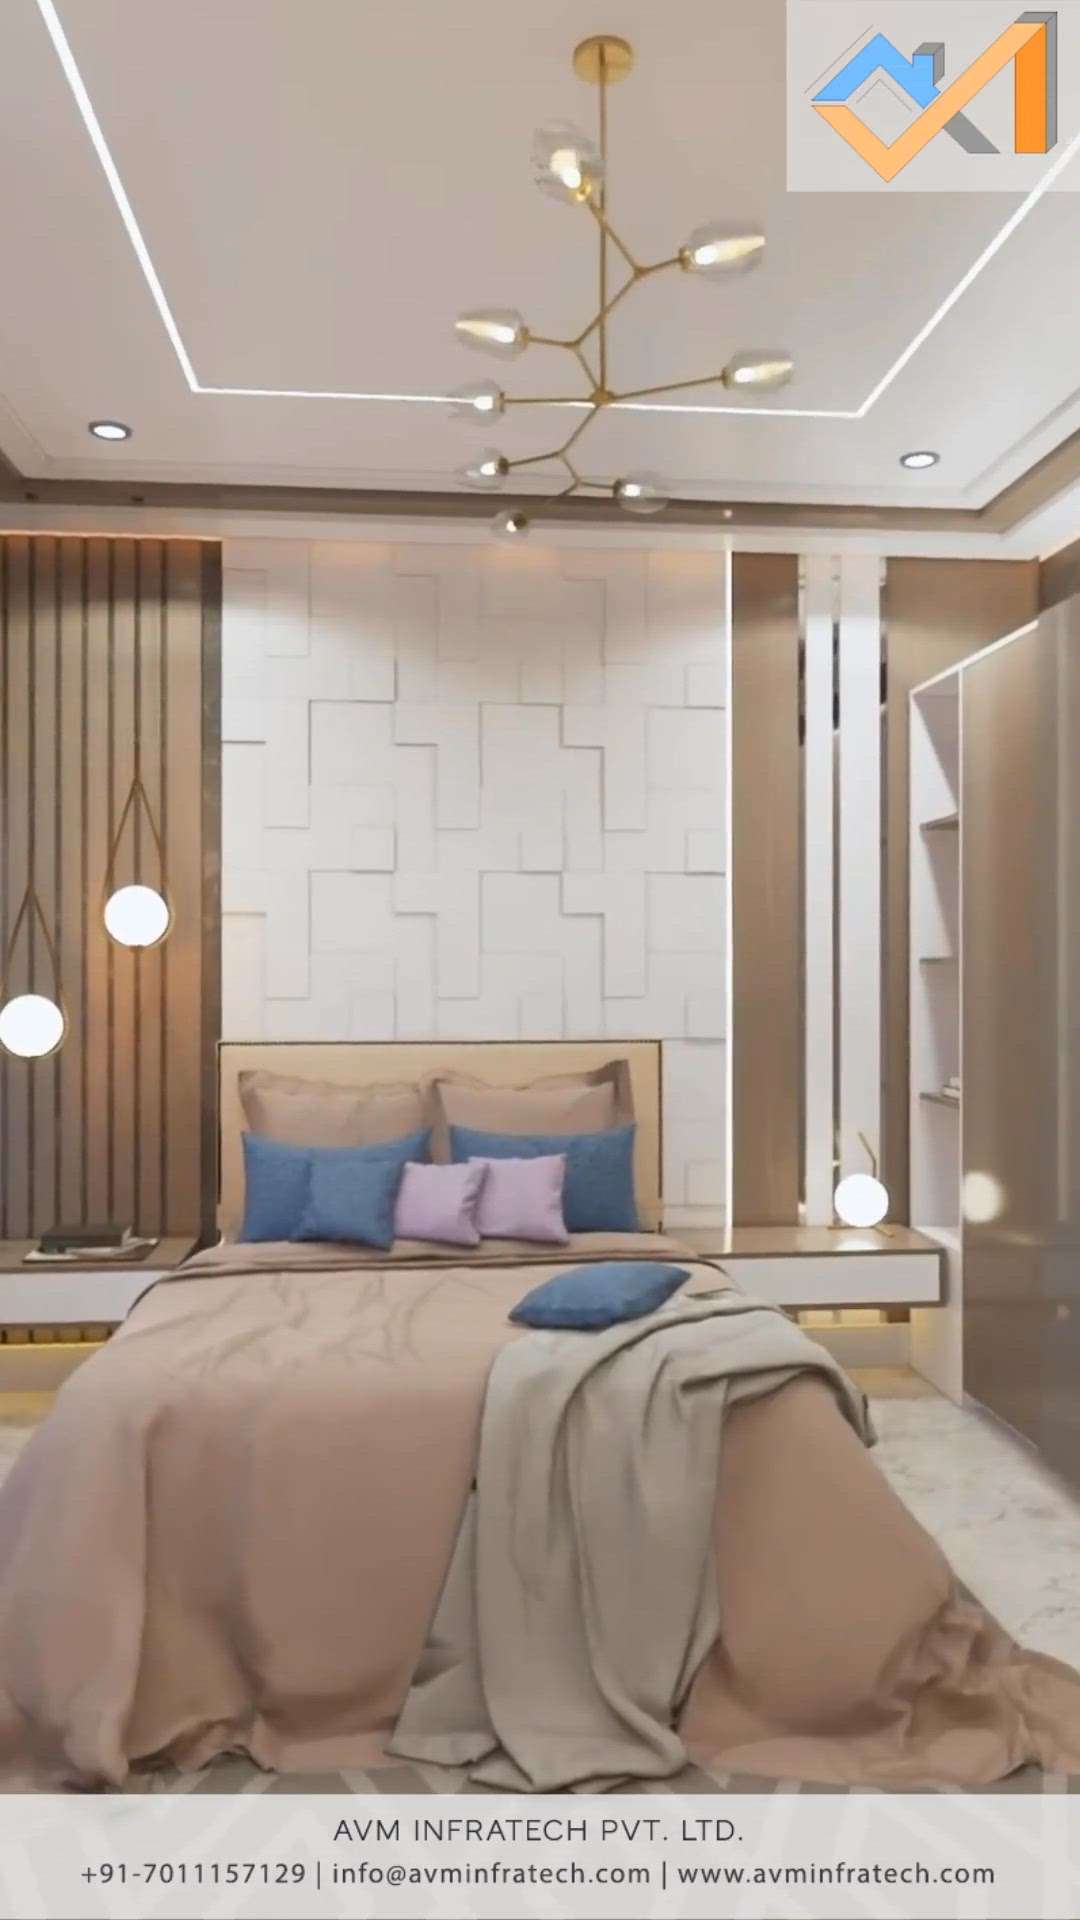 Modern bedroom is all about putting together a space that is both functional and beautiful where you can rest and relax after a productive day!

Follow us for more such amazing updates.
.
.
#modern #modernart #modernfarmhouse #modernarchitecture #moderndesign #modernhome #modernism #bedroom #bedroomdesign #bedroomideas #bedroomdecor #avminfratech #relax #functional #beautiful #day #days